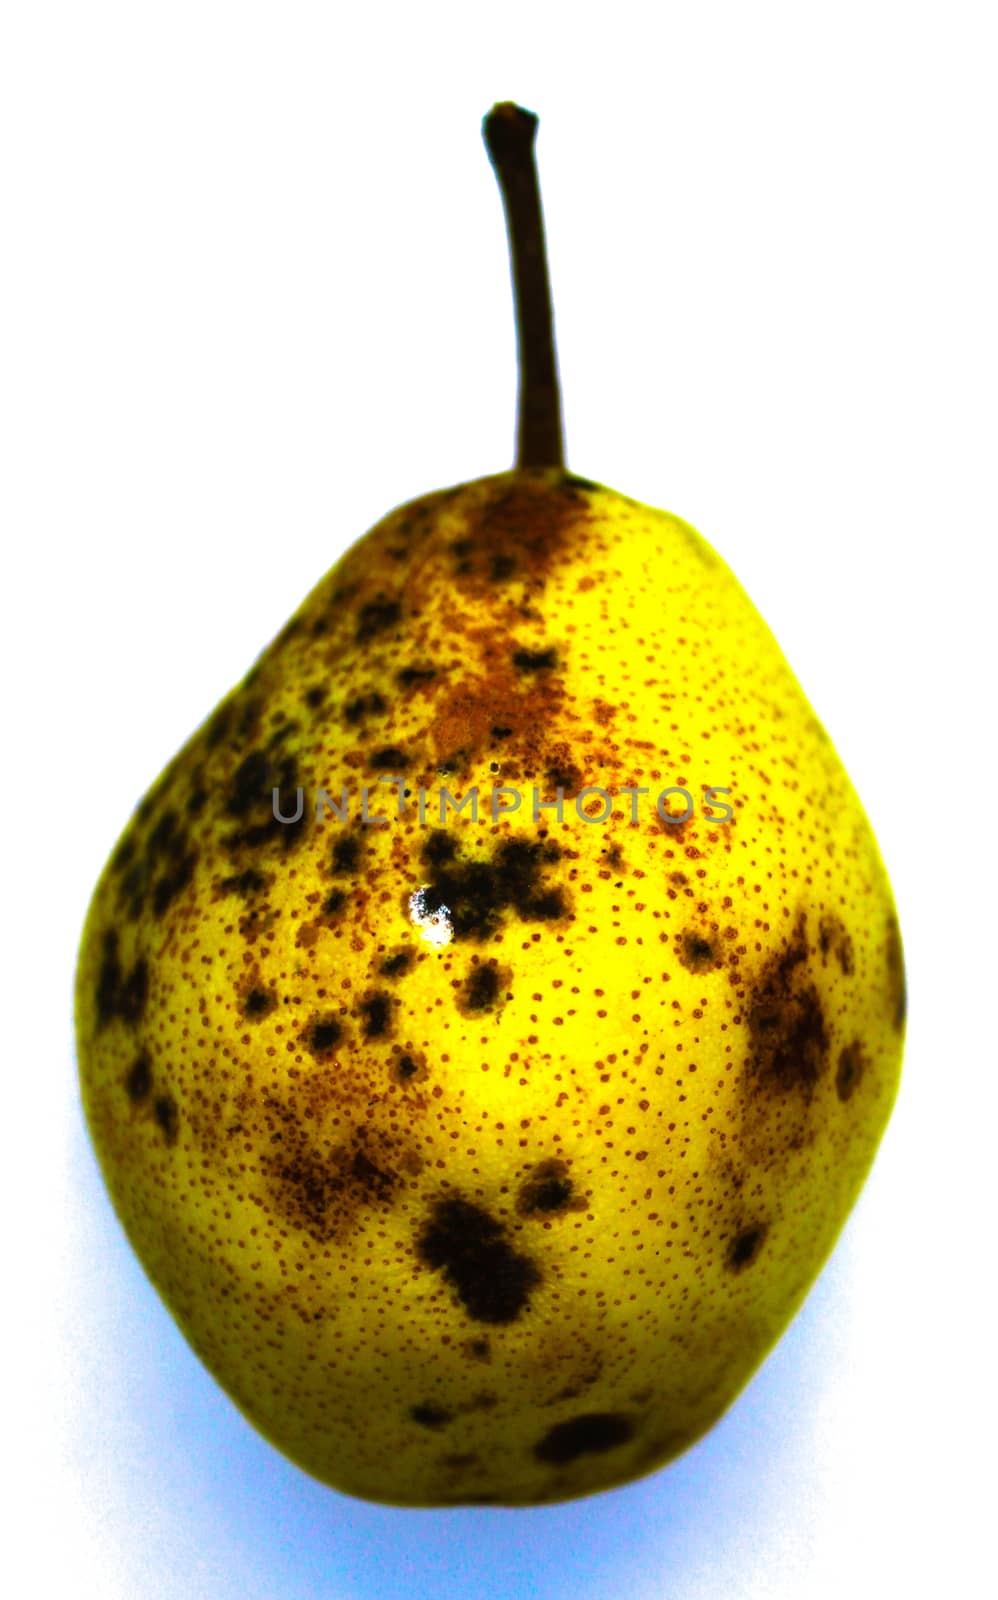 Beautiful yellow pear on white background. Yellow pear with black dots isolated on white background.